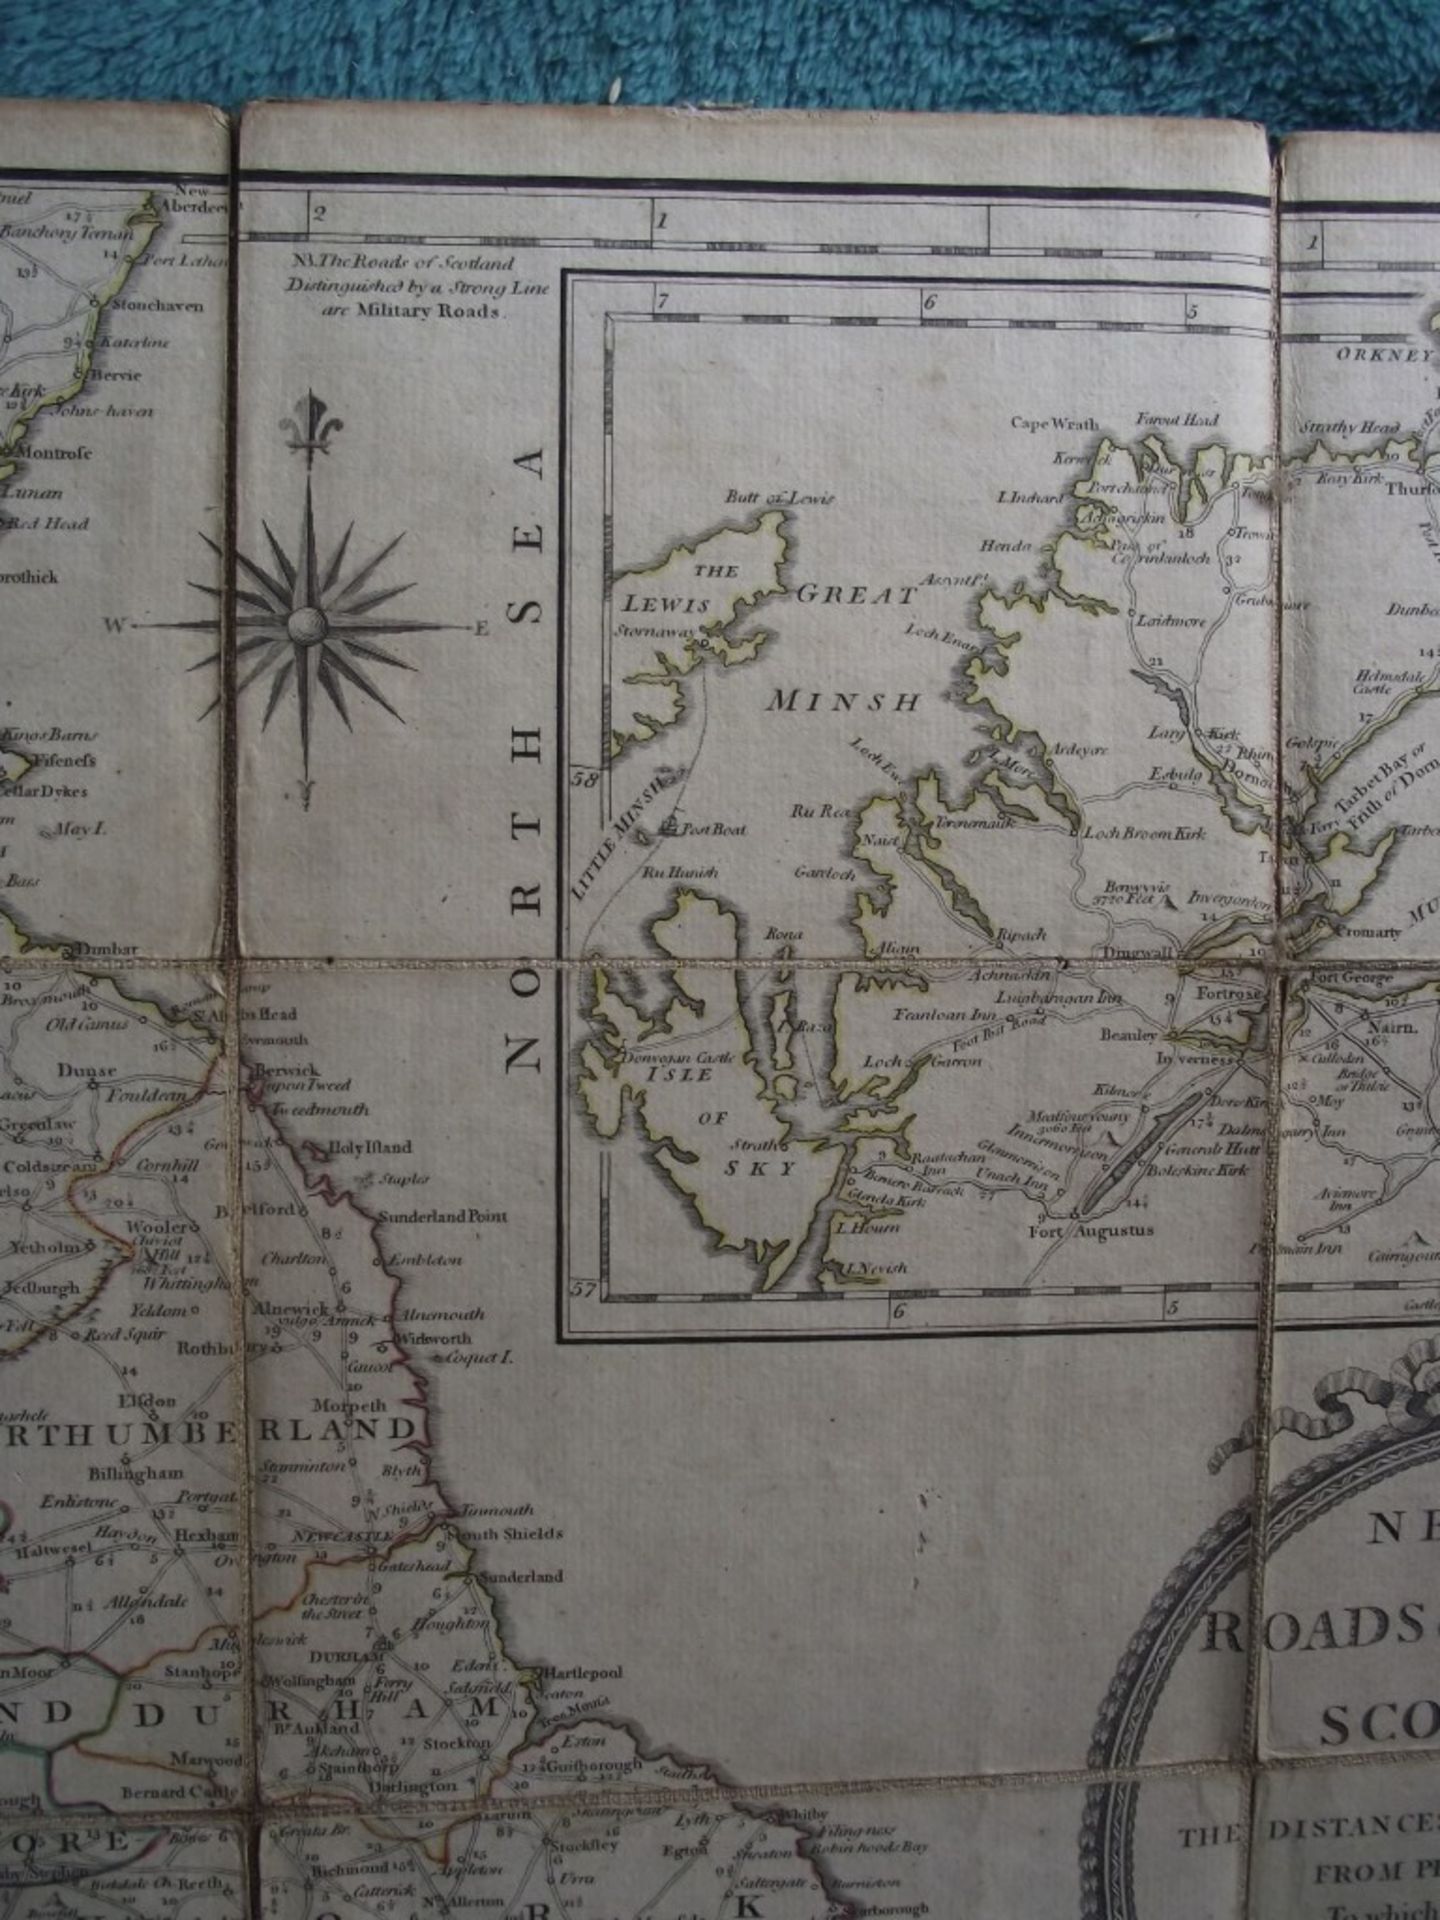 A New Map of The Roads of England and Scotland - Laurie & Whittle - 1794 - With Original Case - Image 9 of 32